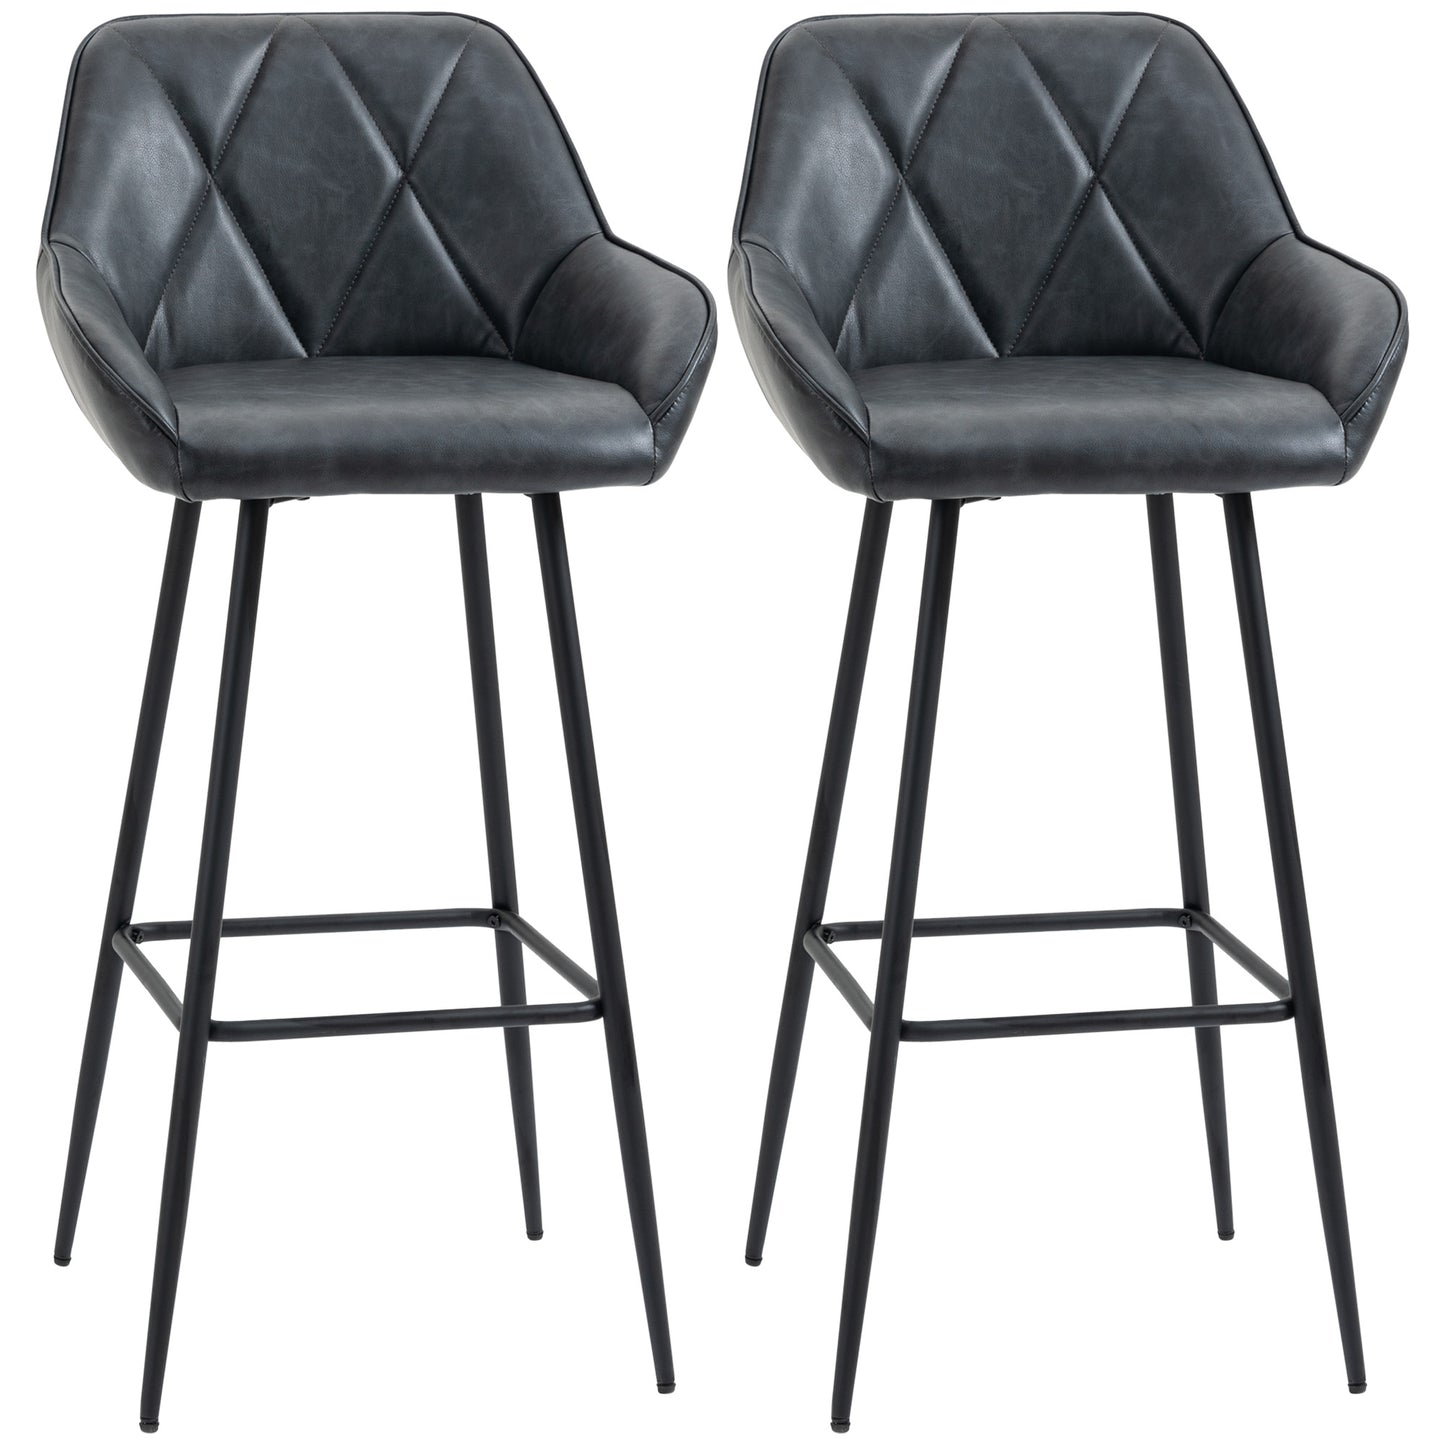 Retro Bar Stools Set of 2, Bar Chairs with Footrest, 30" (76 cm.) Counter Stools with Backs and Steel Legs, for Kitchen Island and Home Bar, Black